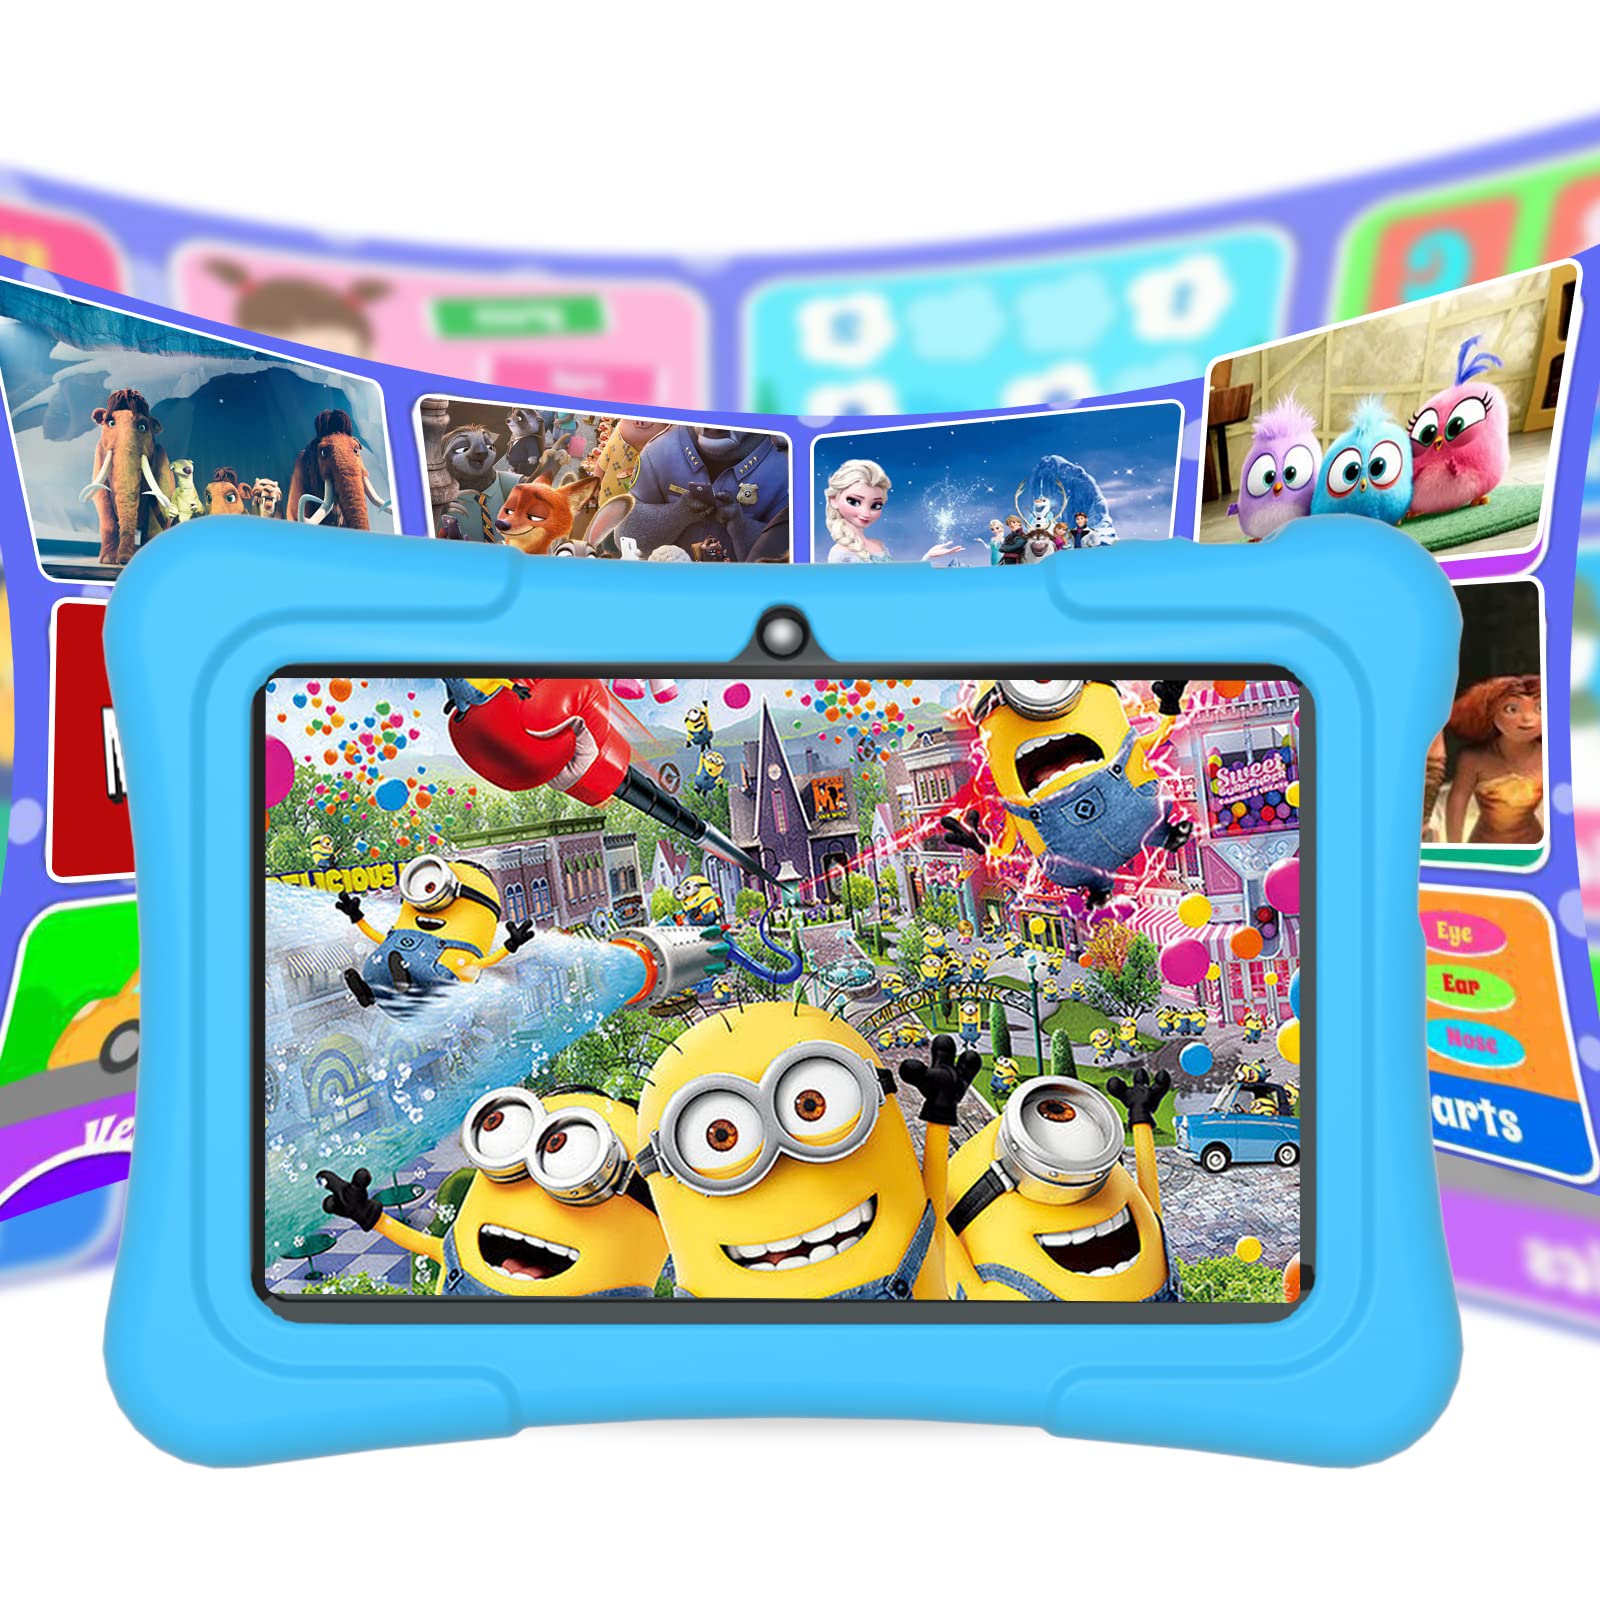 Kids Tablet, 7 inch Android Tablets for 3GB RAM 32GB ROM, Toddler Tablet with Bluetooth, WiFi, GMS, Parental Control, Dual Camera, Shockproof Case, Educational (Blue)